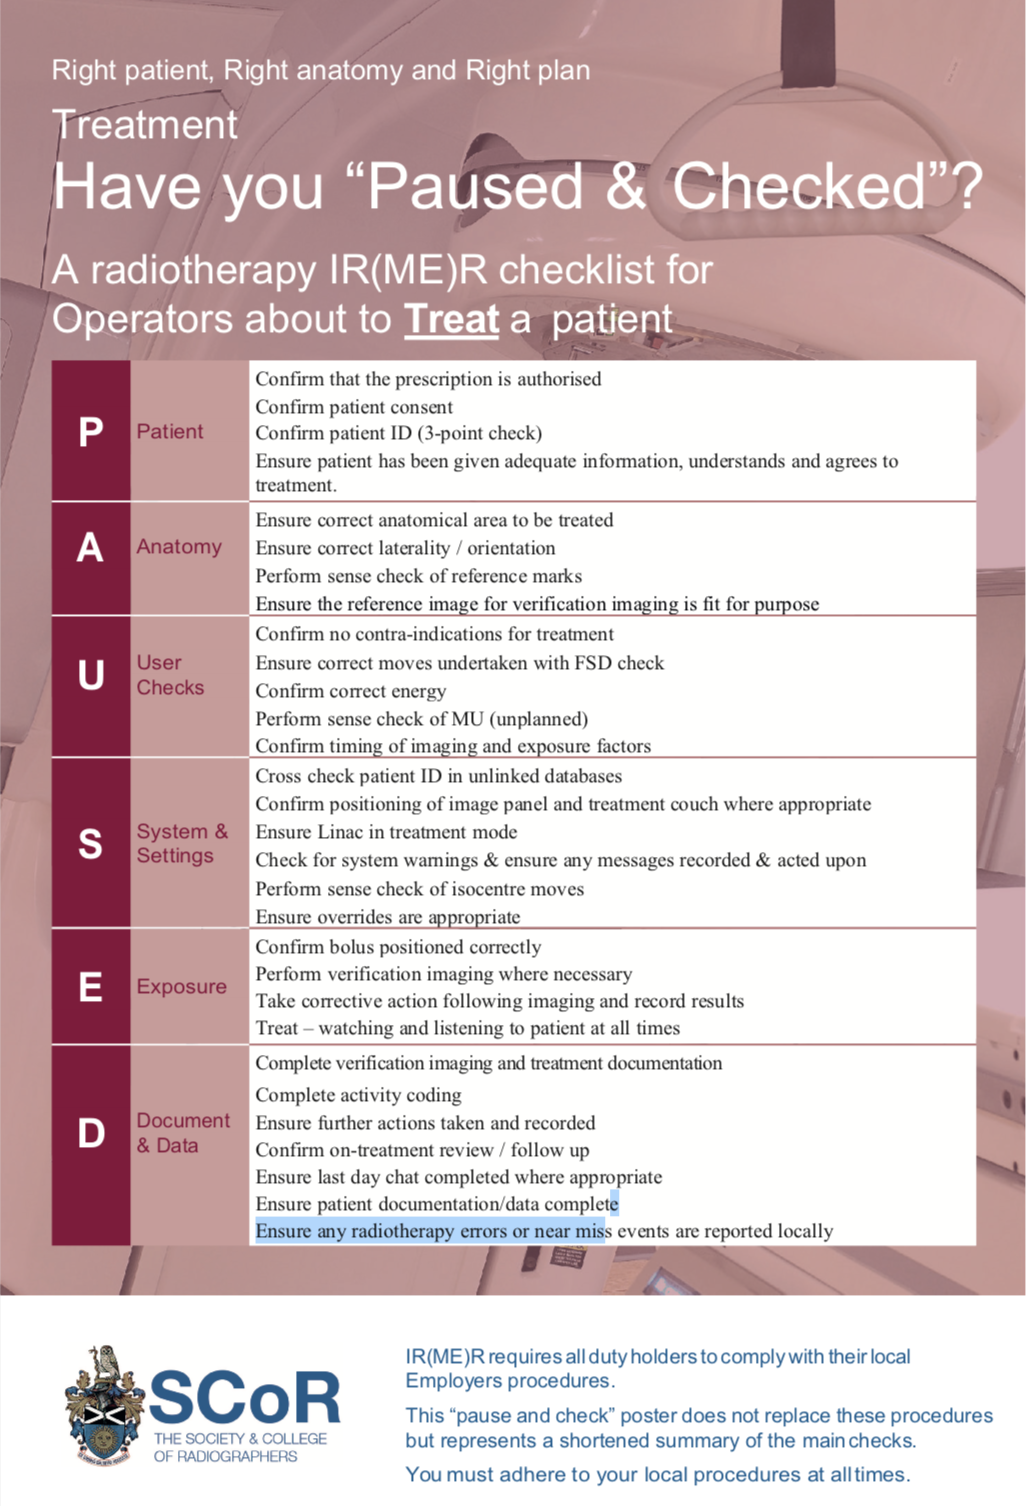 Have you paused and checked? Radiotherapy treatment